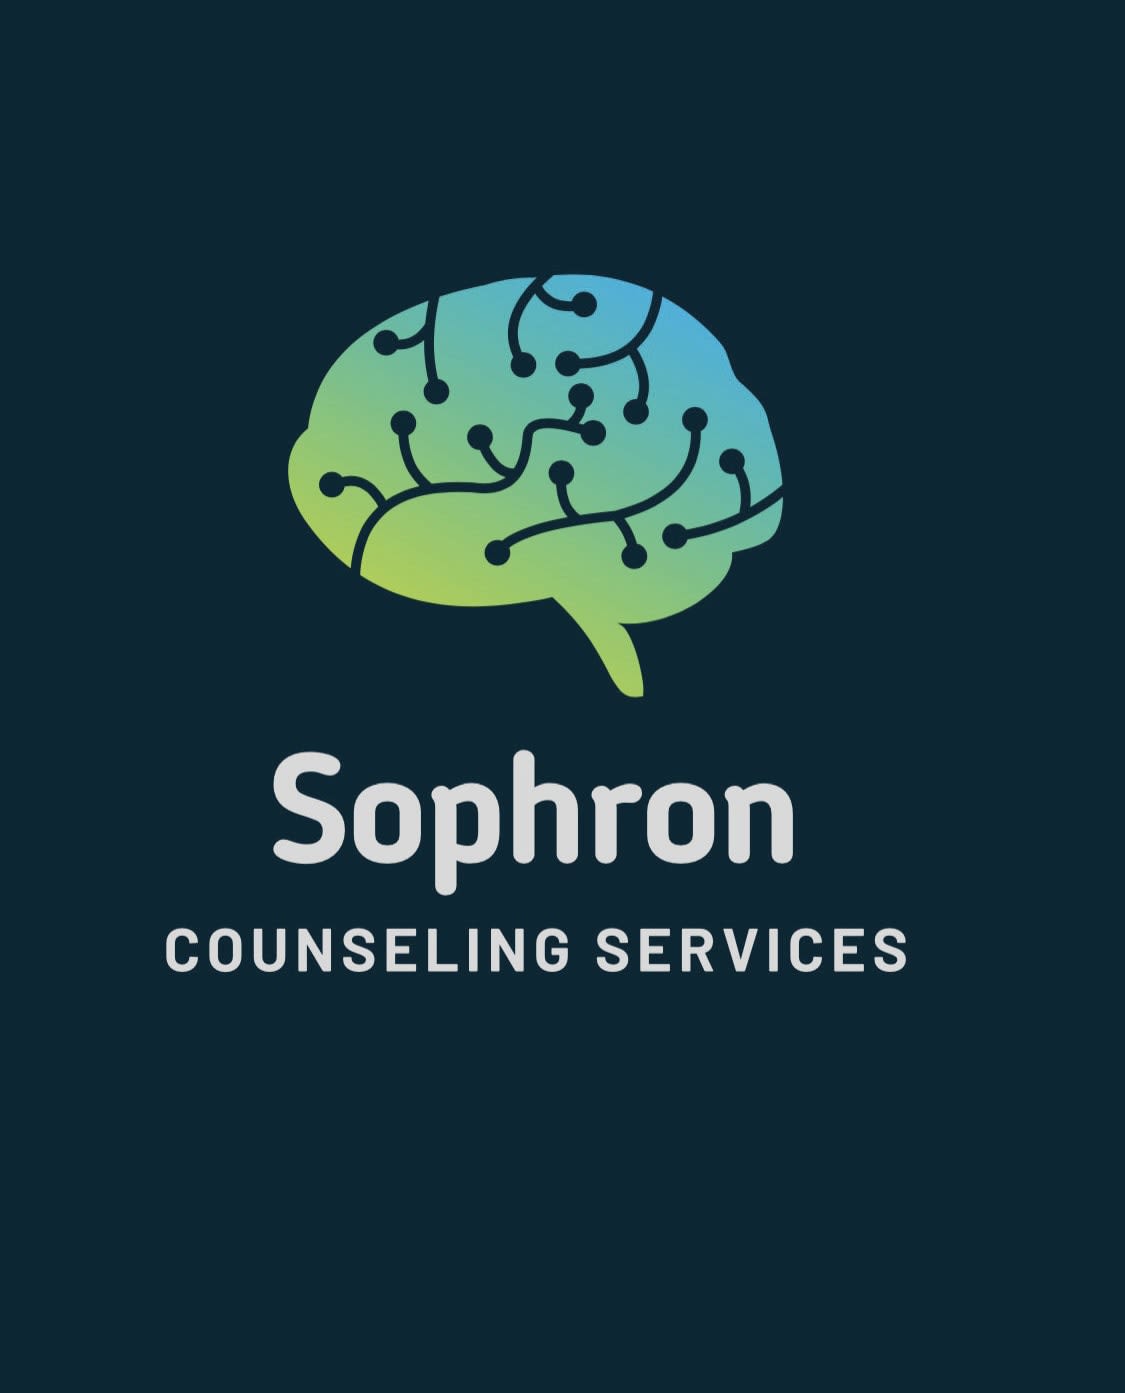 Sophron Counseling Services